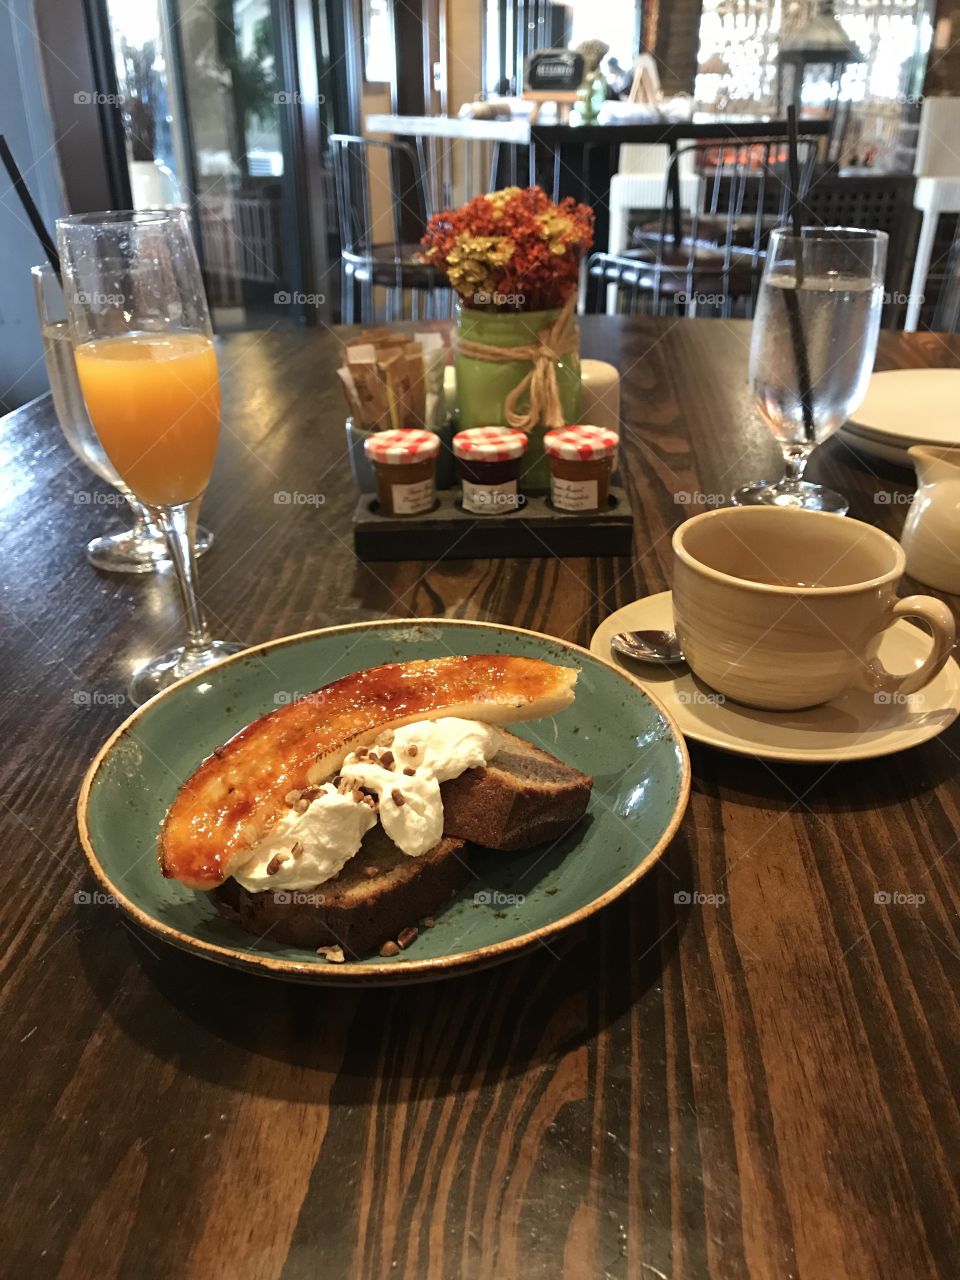 Brunch is the best meal ever because I’m a millennial! This sweet and savory treat was enjoyed with a mimosa by my Tavel partner. My meal not shown, as it was too delicious to wait for a photograph. 